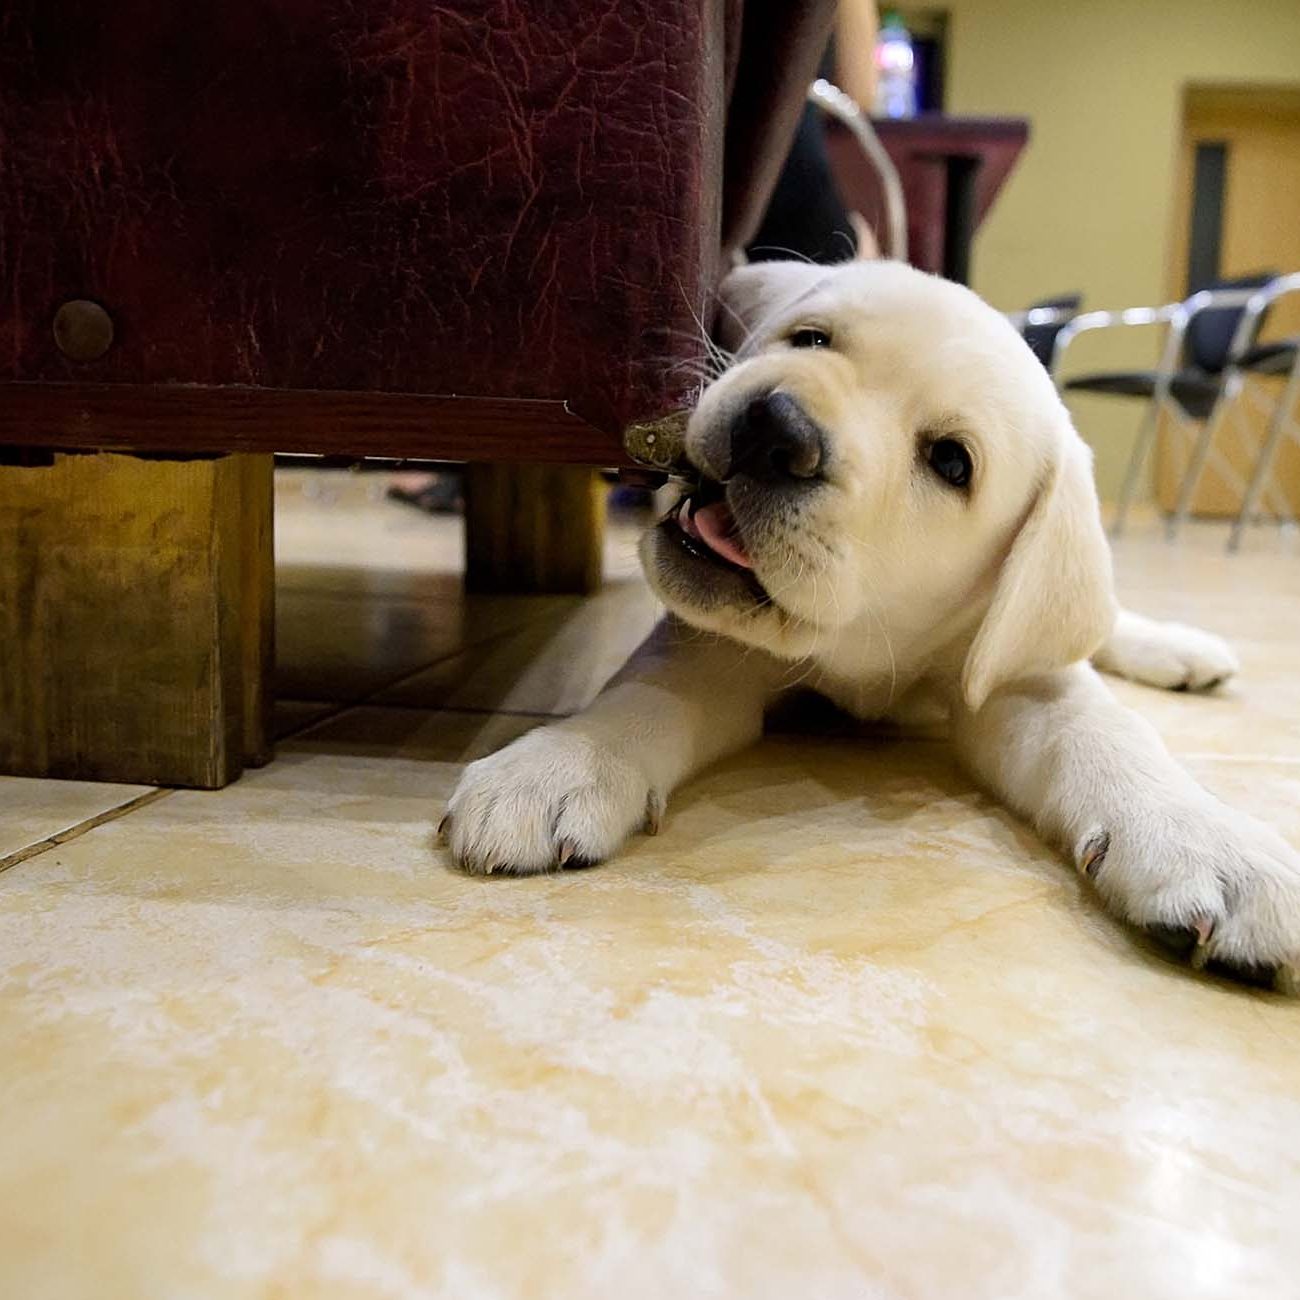 Dog, labrador puppy, is gnawing on sofa in the house due to the eruption of new teeth